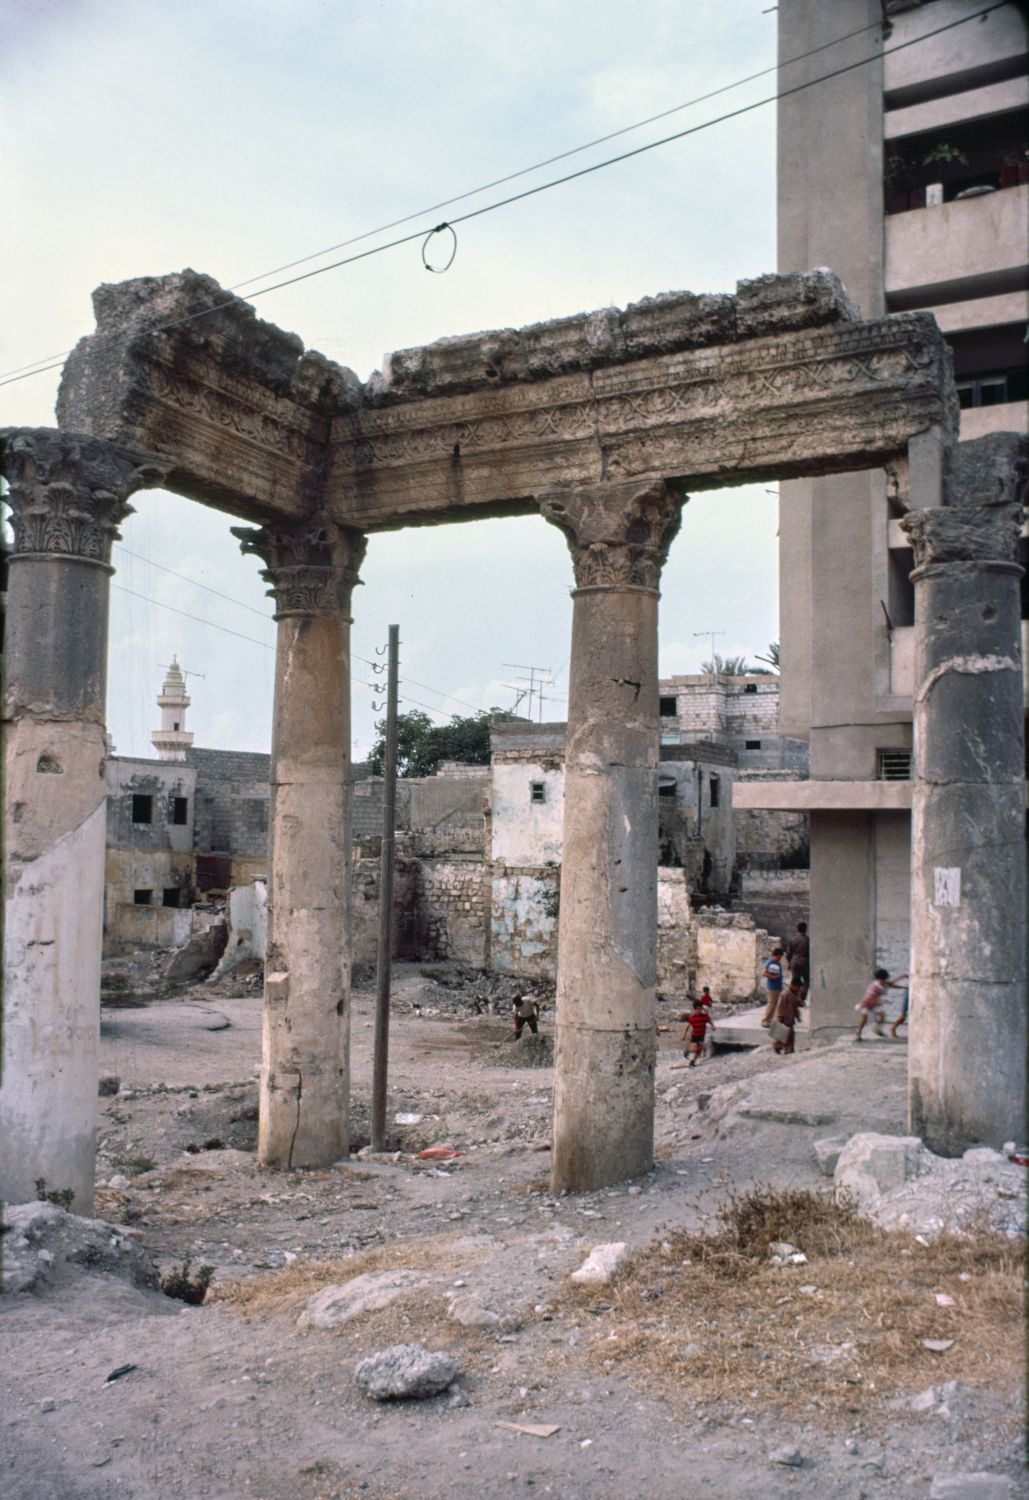 Remains of a Roman colonnade.